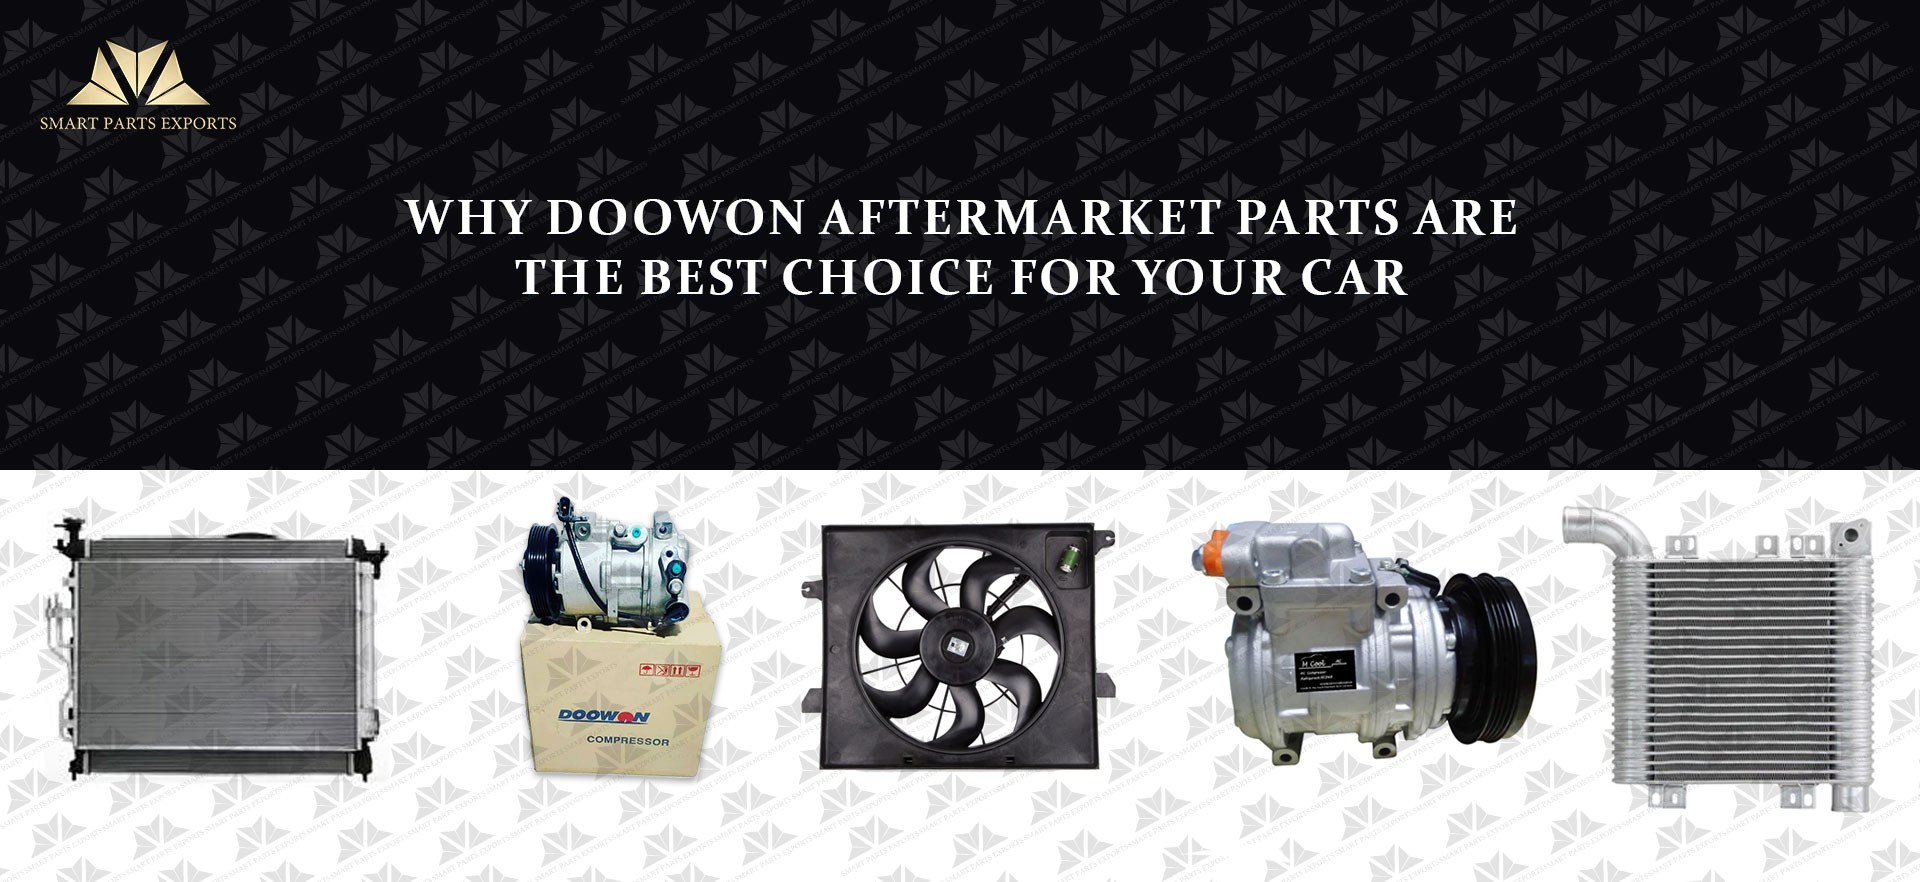 Why Doowon Aftermarket Parts are the Best Choice for Your Car